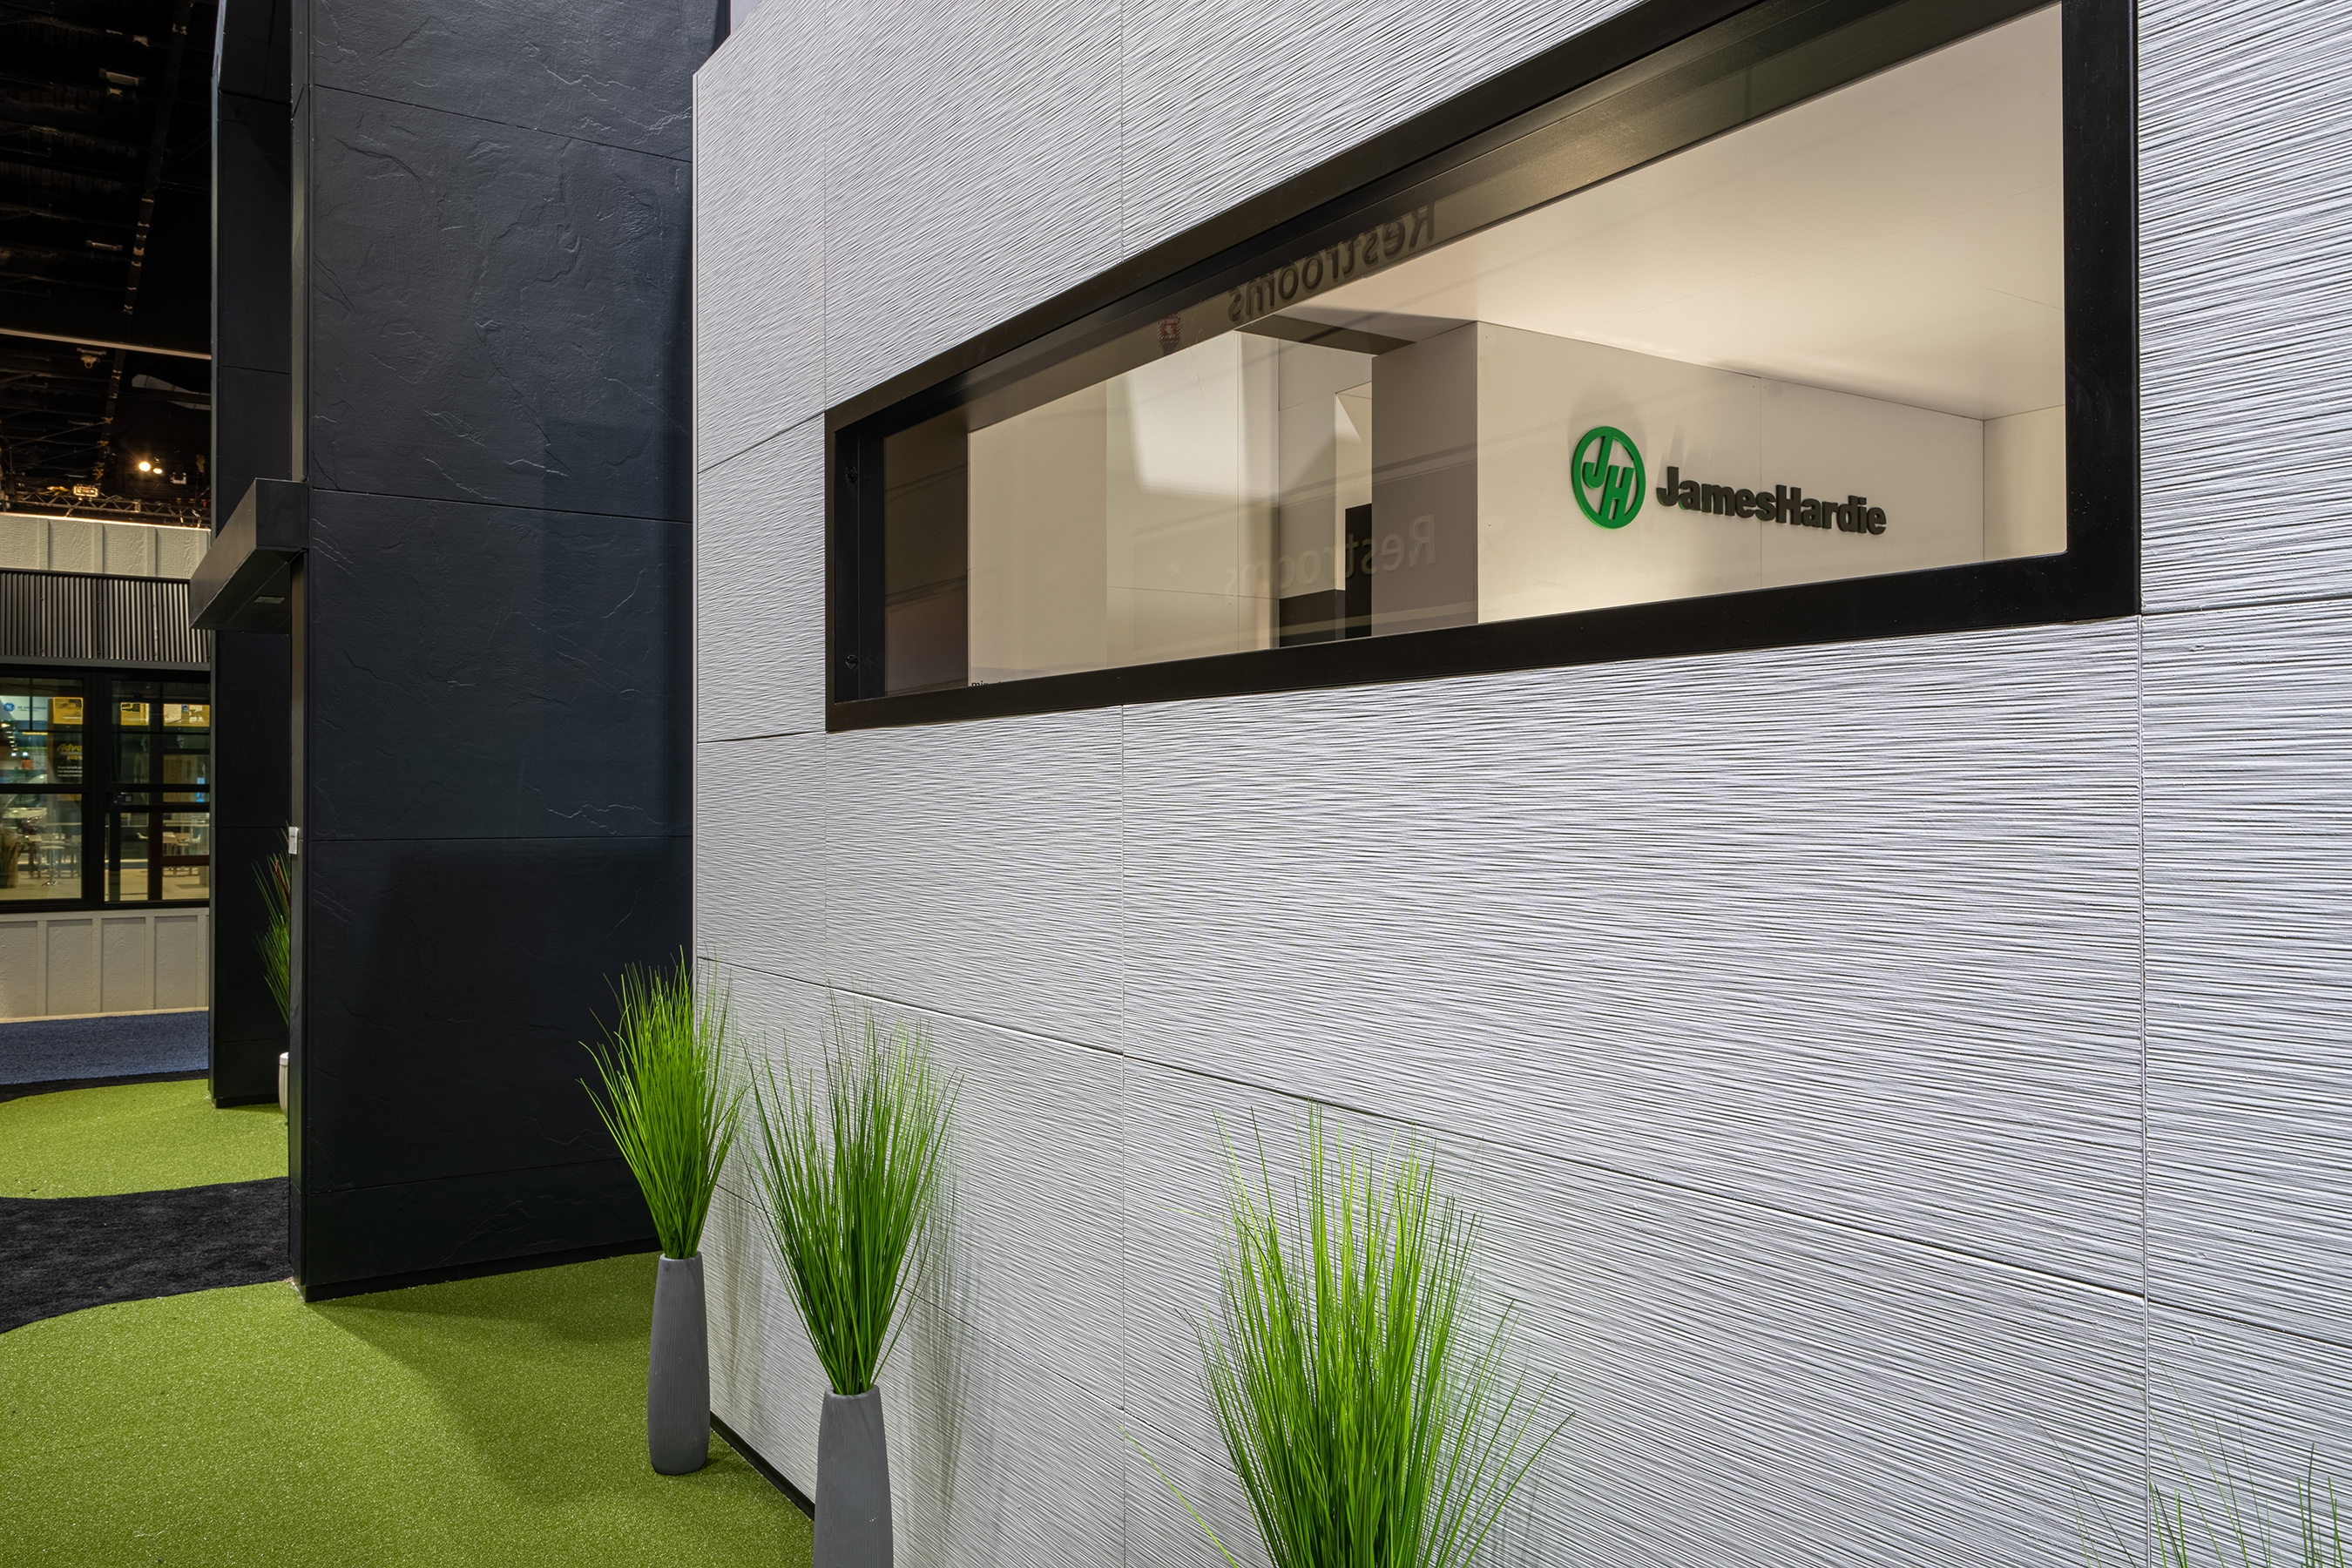 Hardie® Architectural Panel – Sea Grass and Hardie® Architectural Panel – Sculpted Clay debuted at the International Builders’ Show in Orlando.